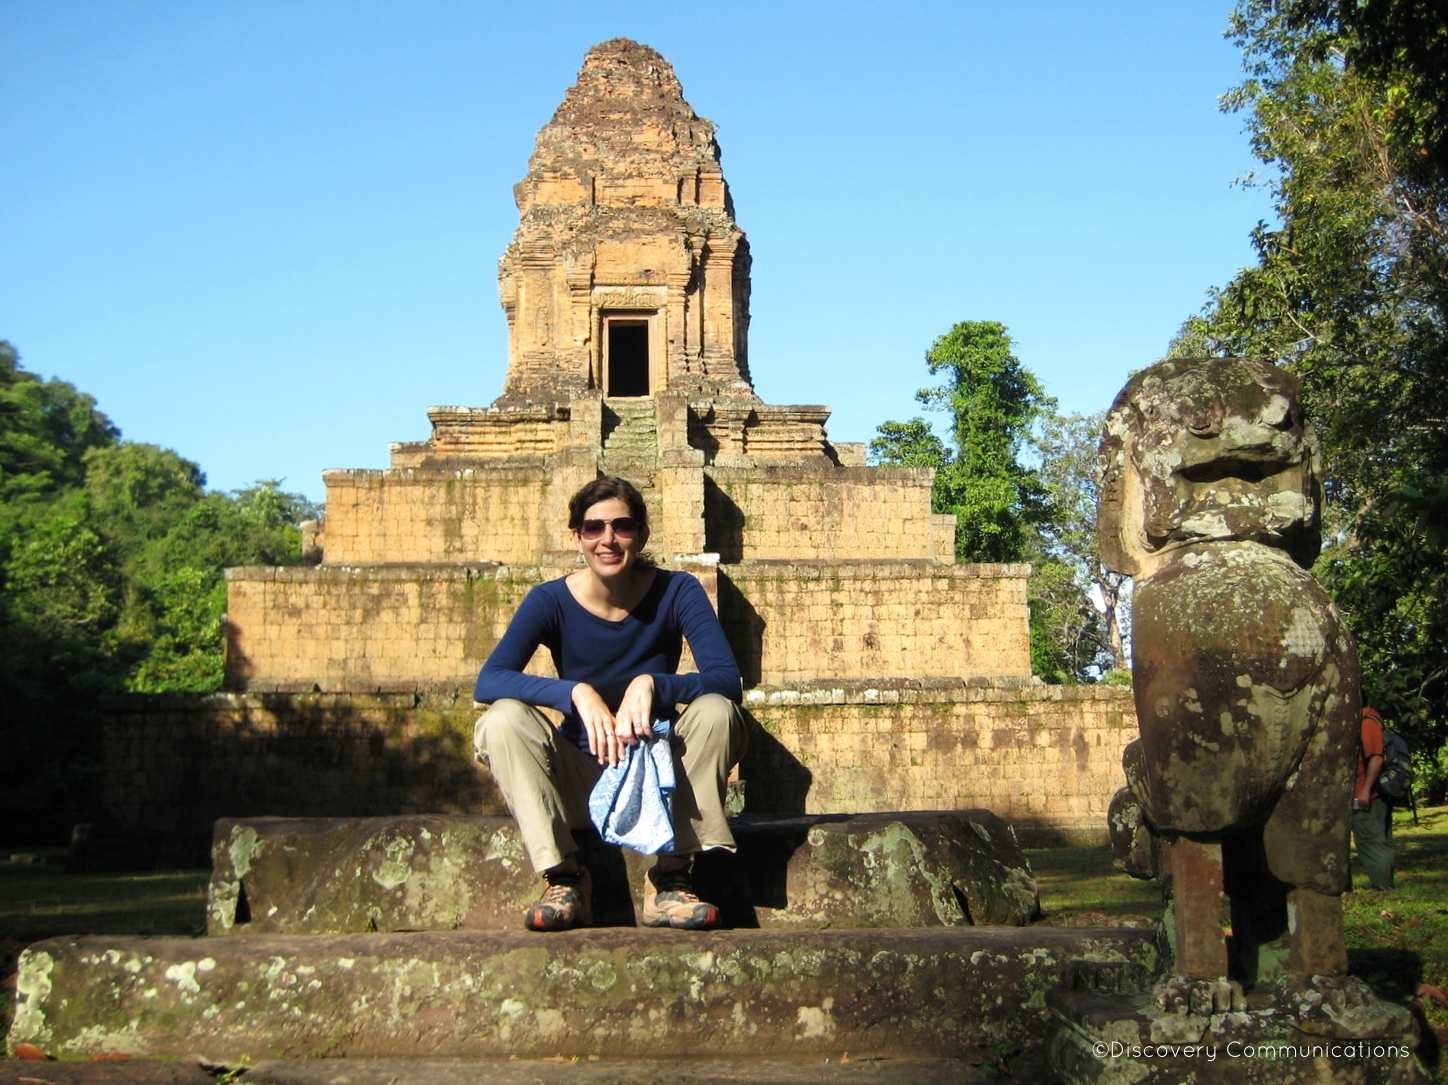  Taking a break on location in Cambodia while filming of "Out of Egypt." 